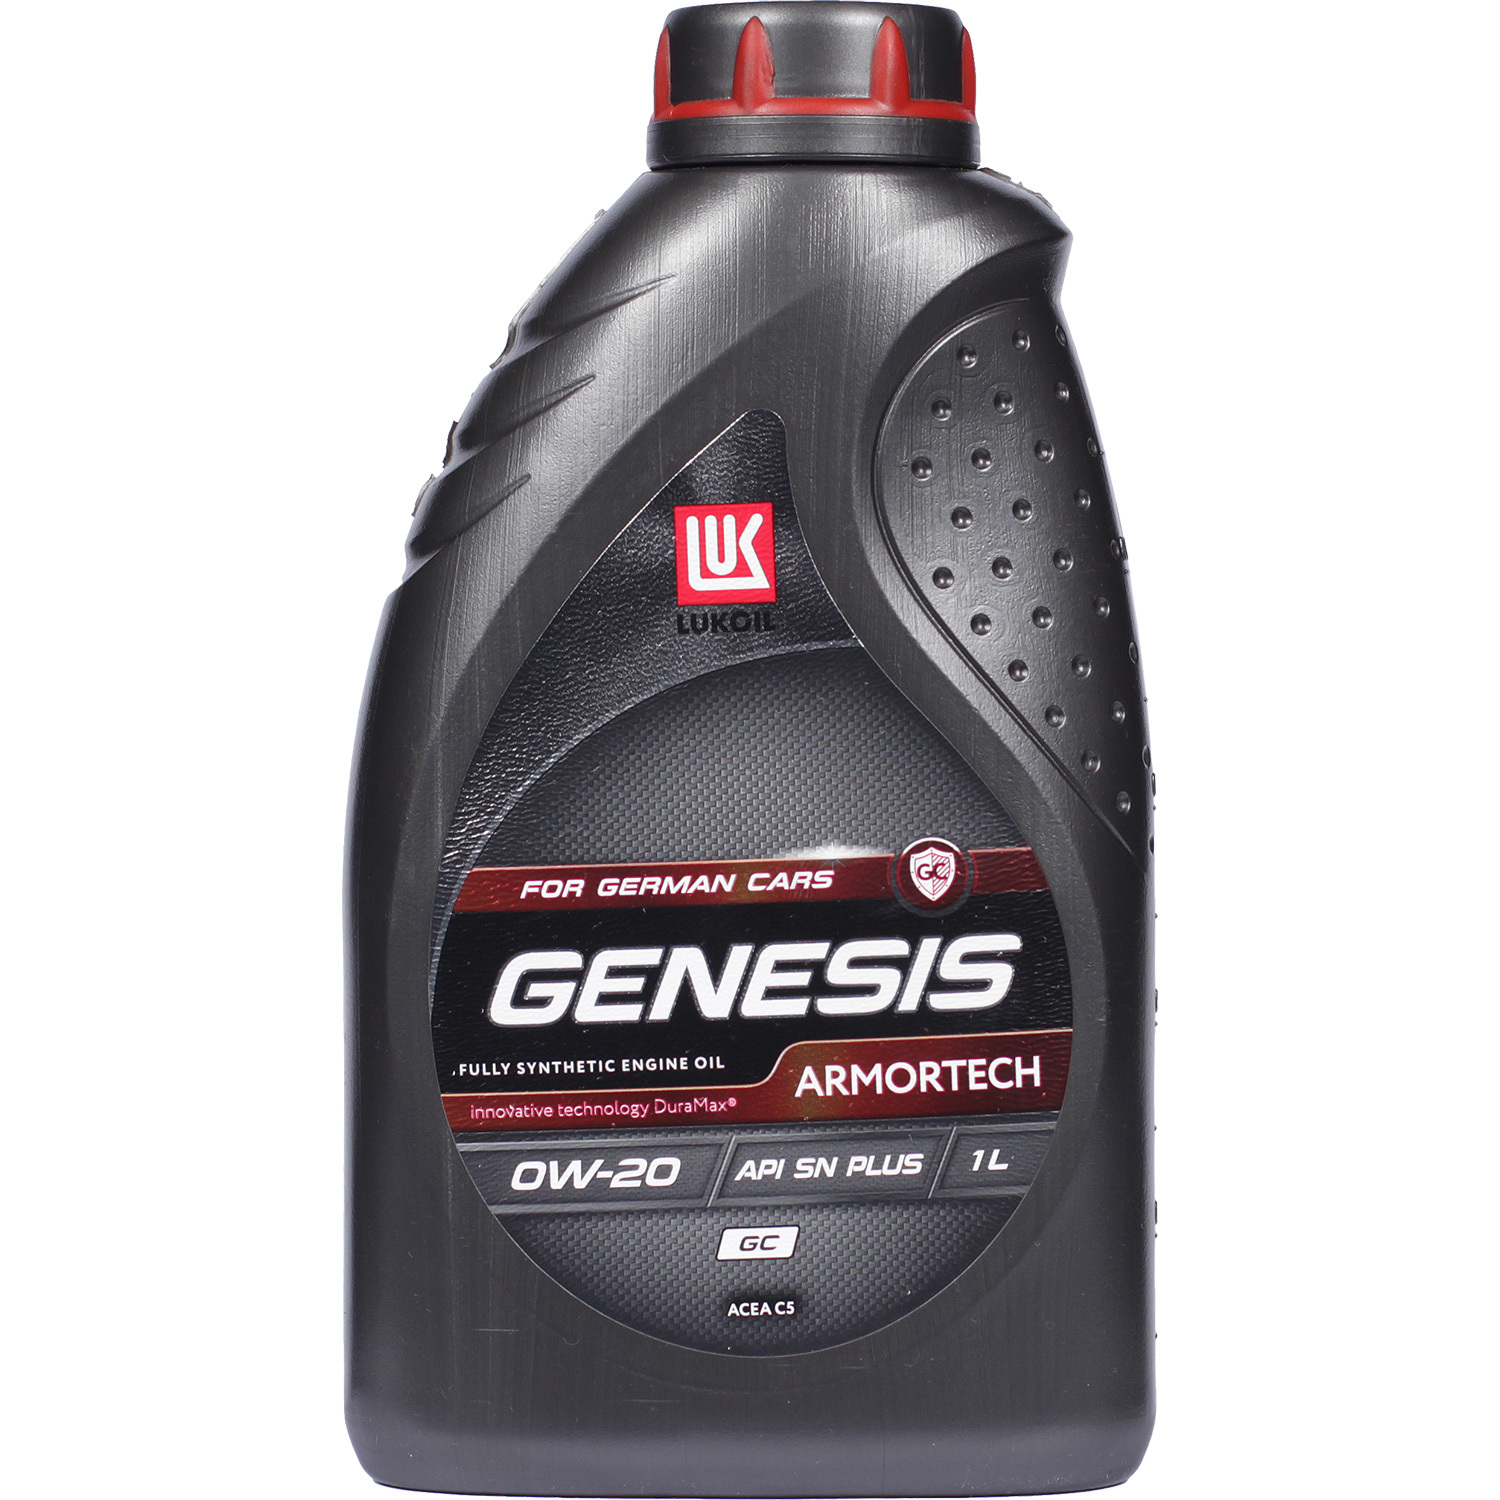 Lukoil Моторное масло Lukoil Genesis Armortech GC 0W-20, 1 л lukoil моторное масло lukoil genesis armortech gc 0w 20 1 л